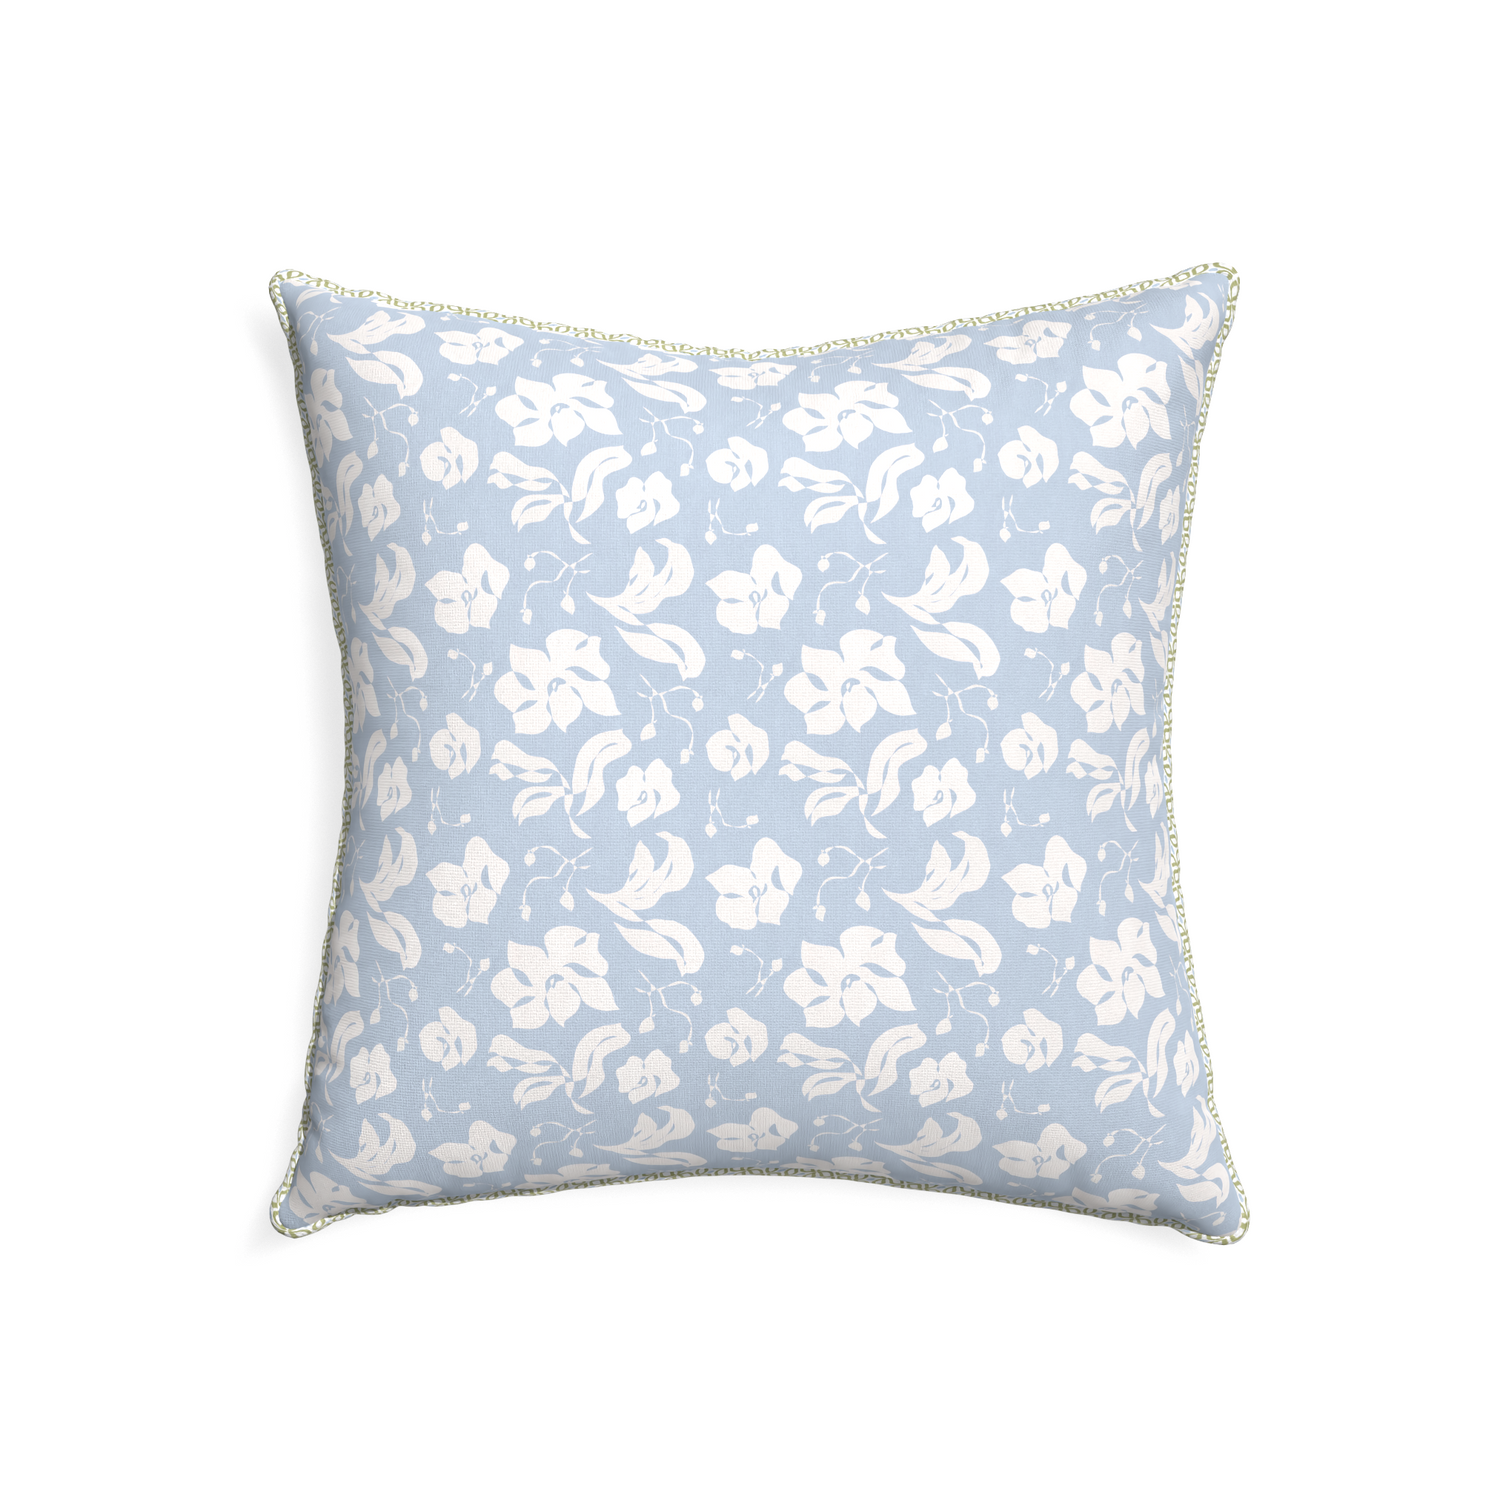 22-square georgia custom pillow with l piping on white background